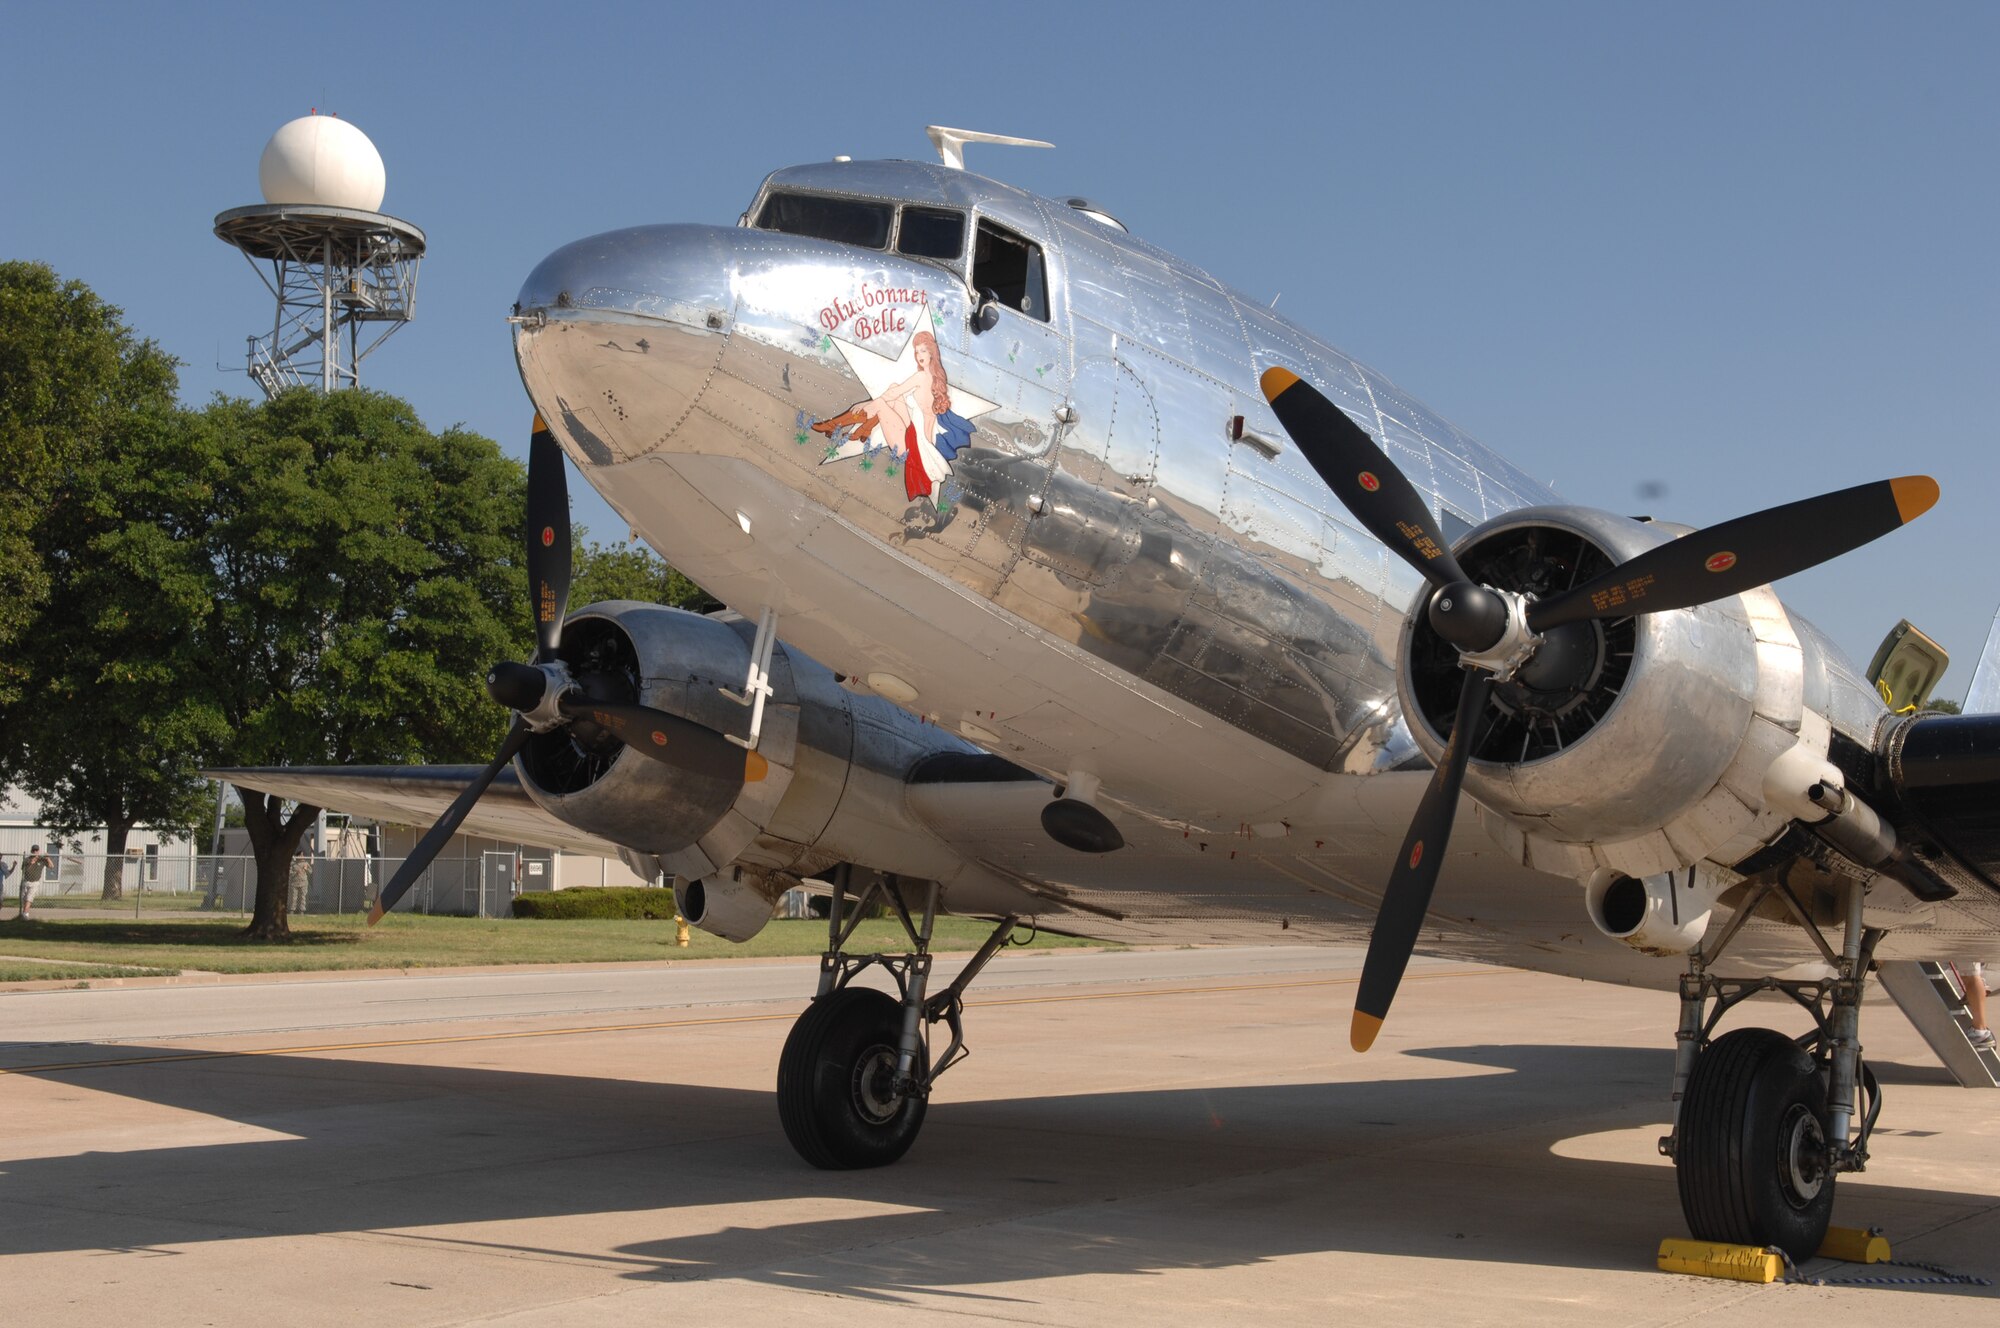 The C-47 Bluebonnet Belle sits on the tarmac at San Angelo Regional Airport Mathis Field. (U.S. Air Force photo by Tech. Sgt. John Barton)